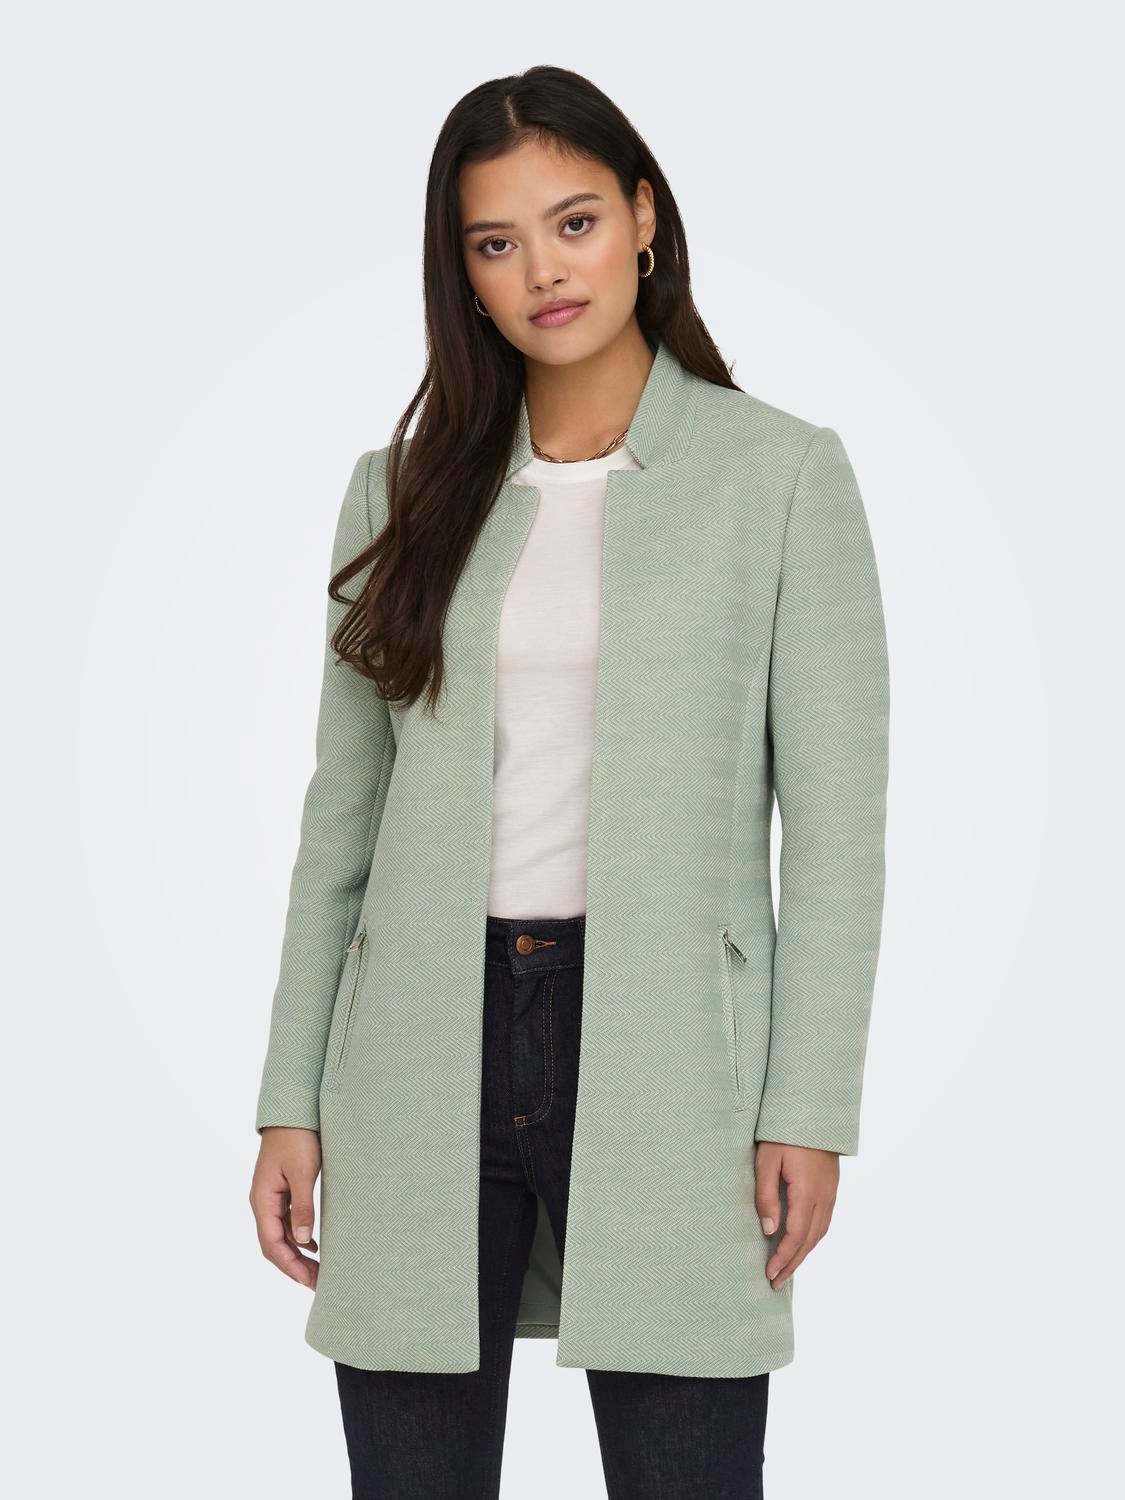 ONLY Coatigan With Zip Pockets -Lily Pad - 15245344